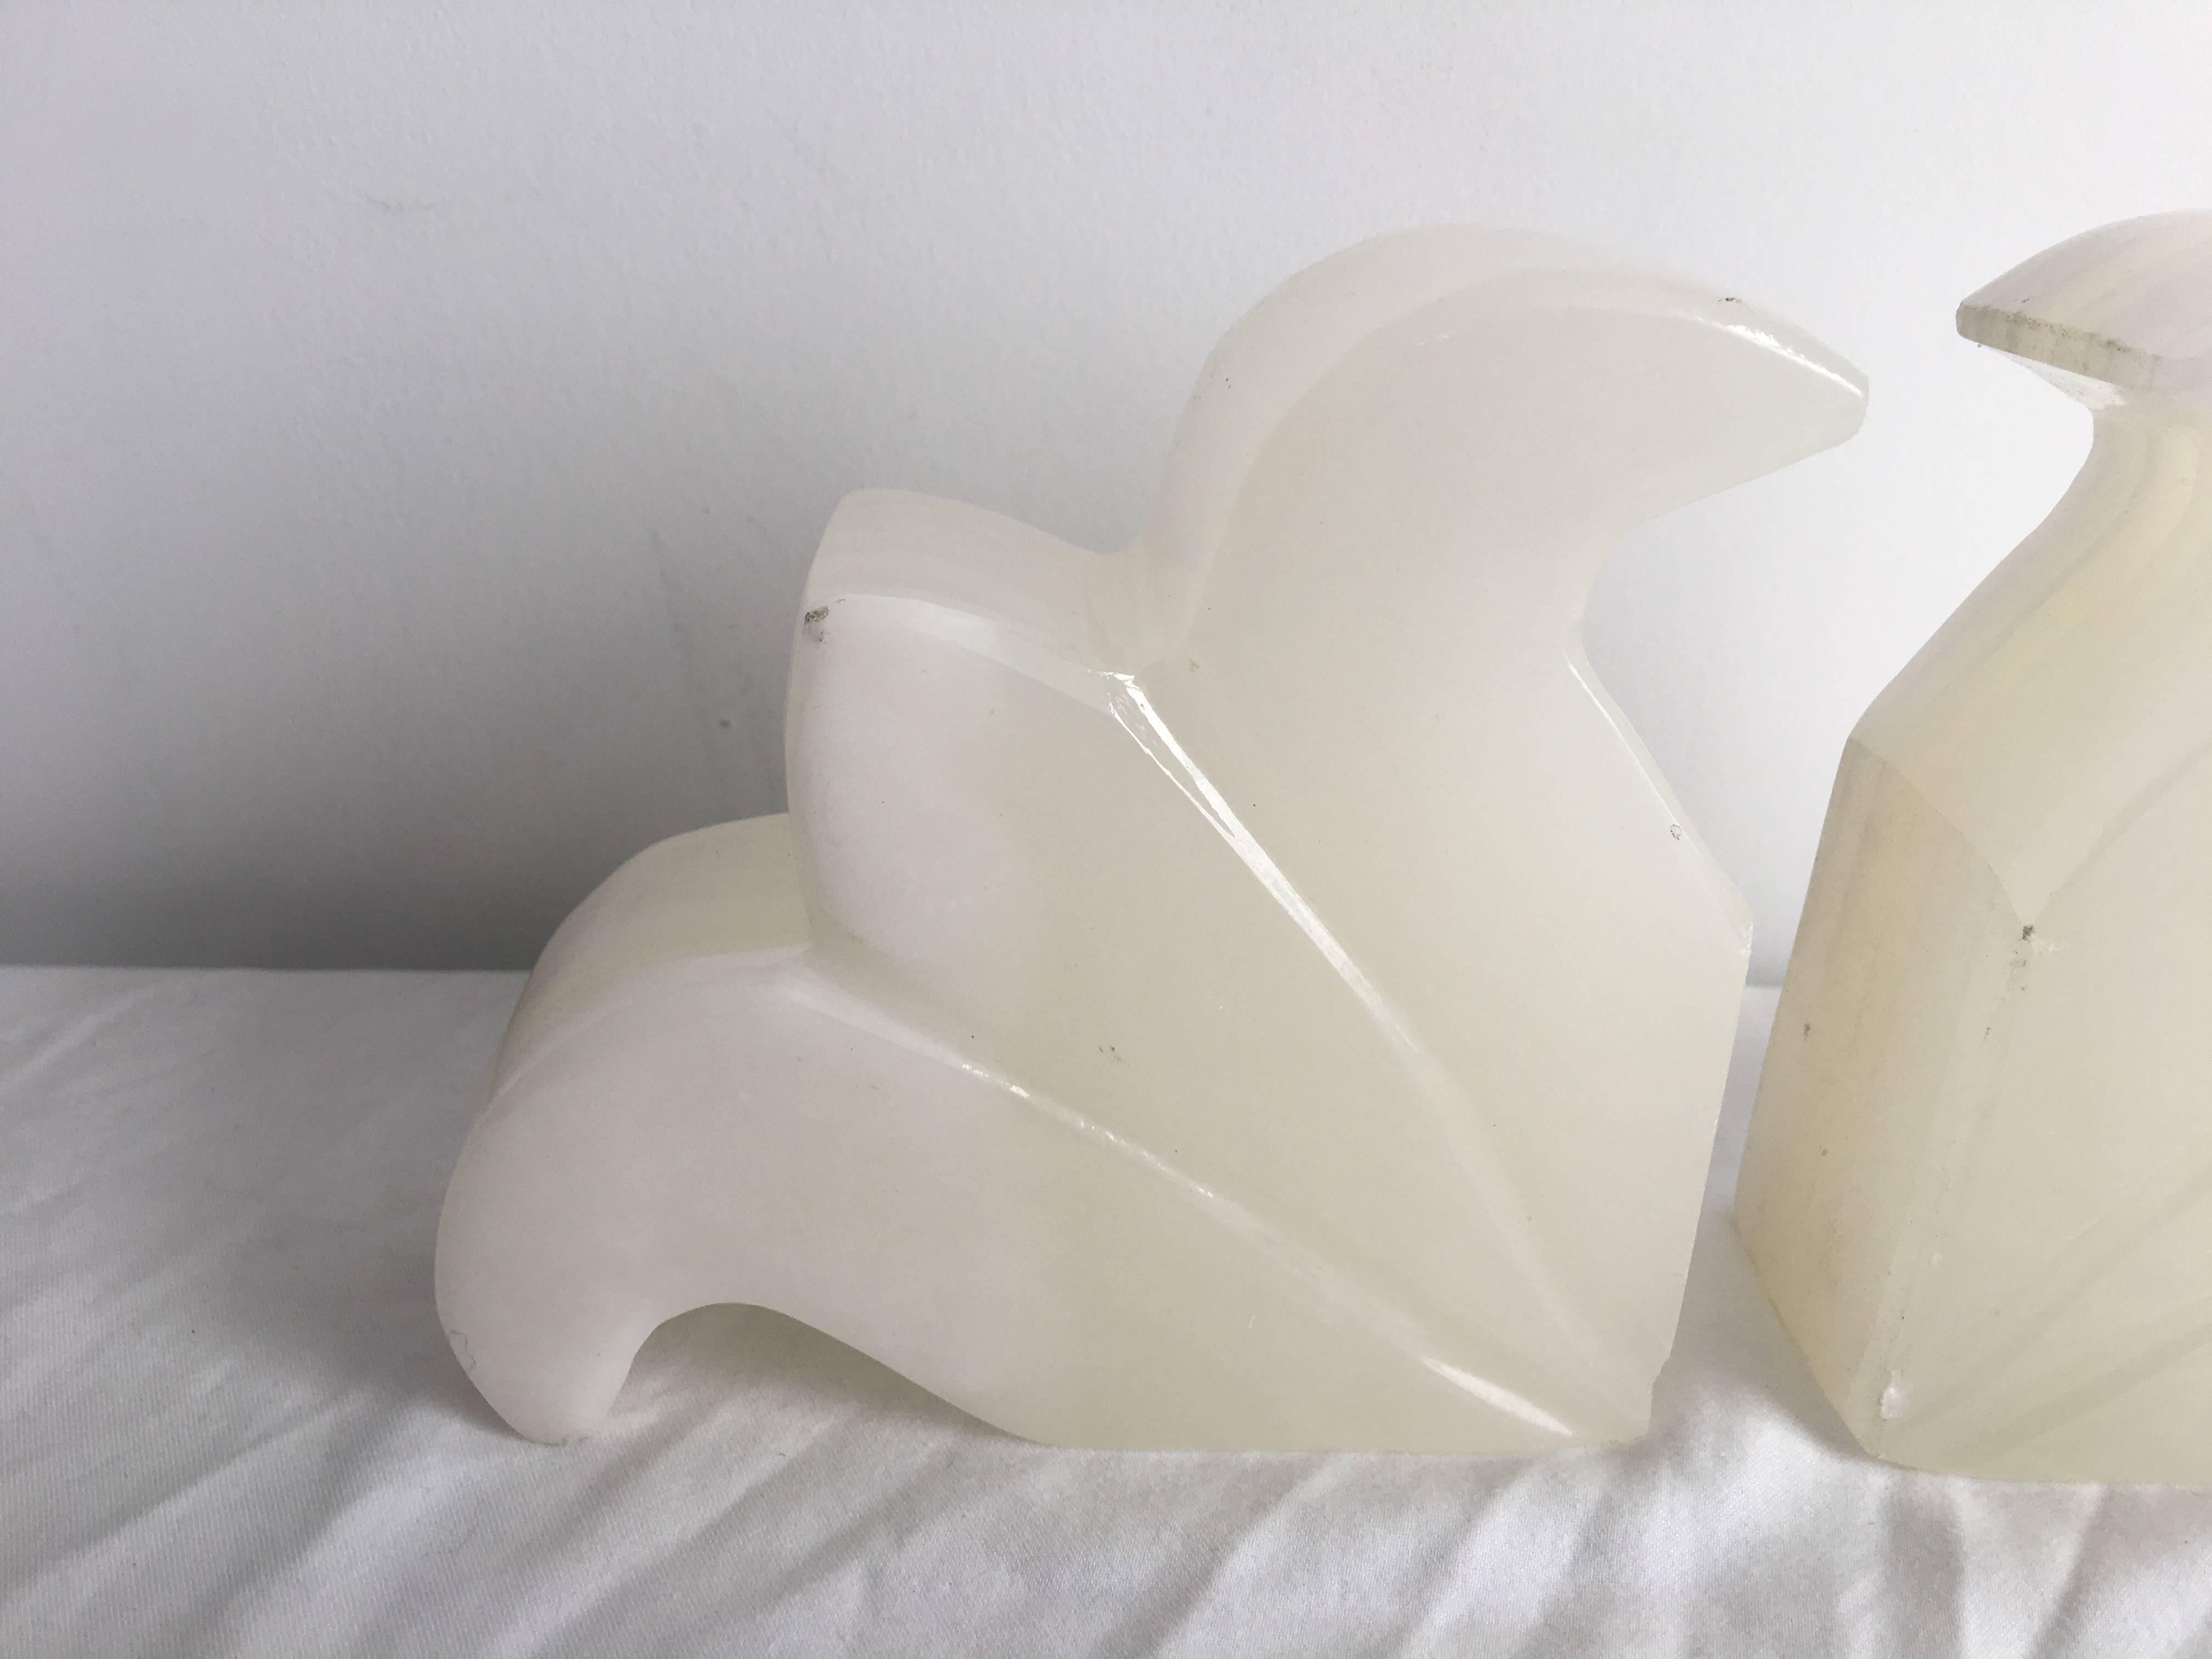 Offered is a stunning, pair of 1920s Fleur de Lis, white onyx bookends.